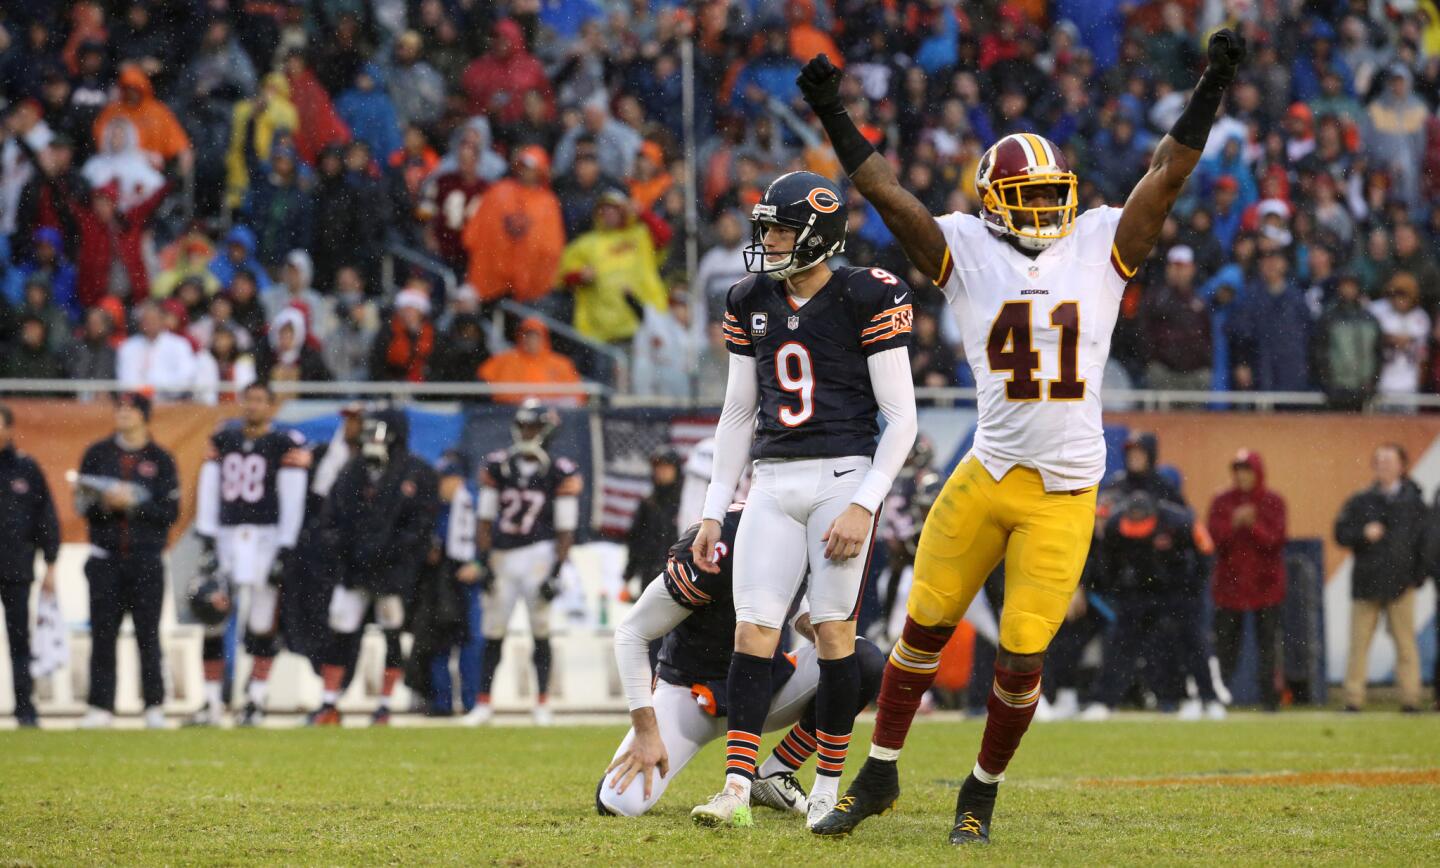 Robbie Gould watches his 50-yard field goal sail wide right in the final two minutes as the Redskins' Will Blackmon celebrates.